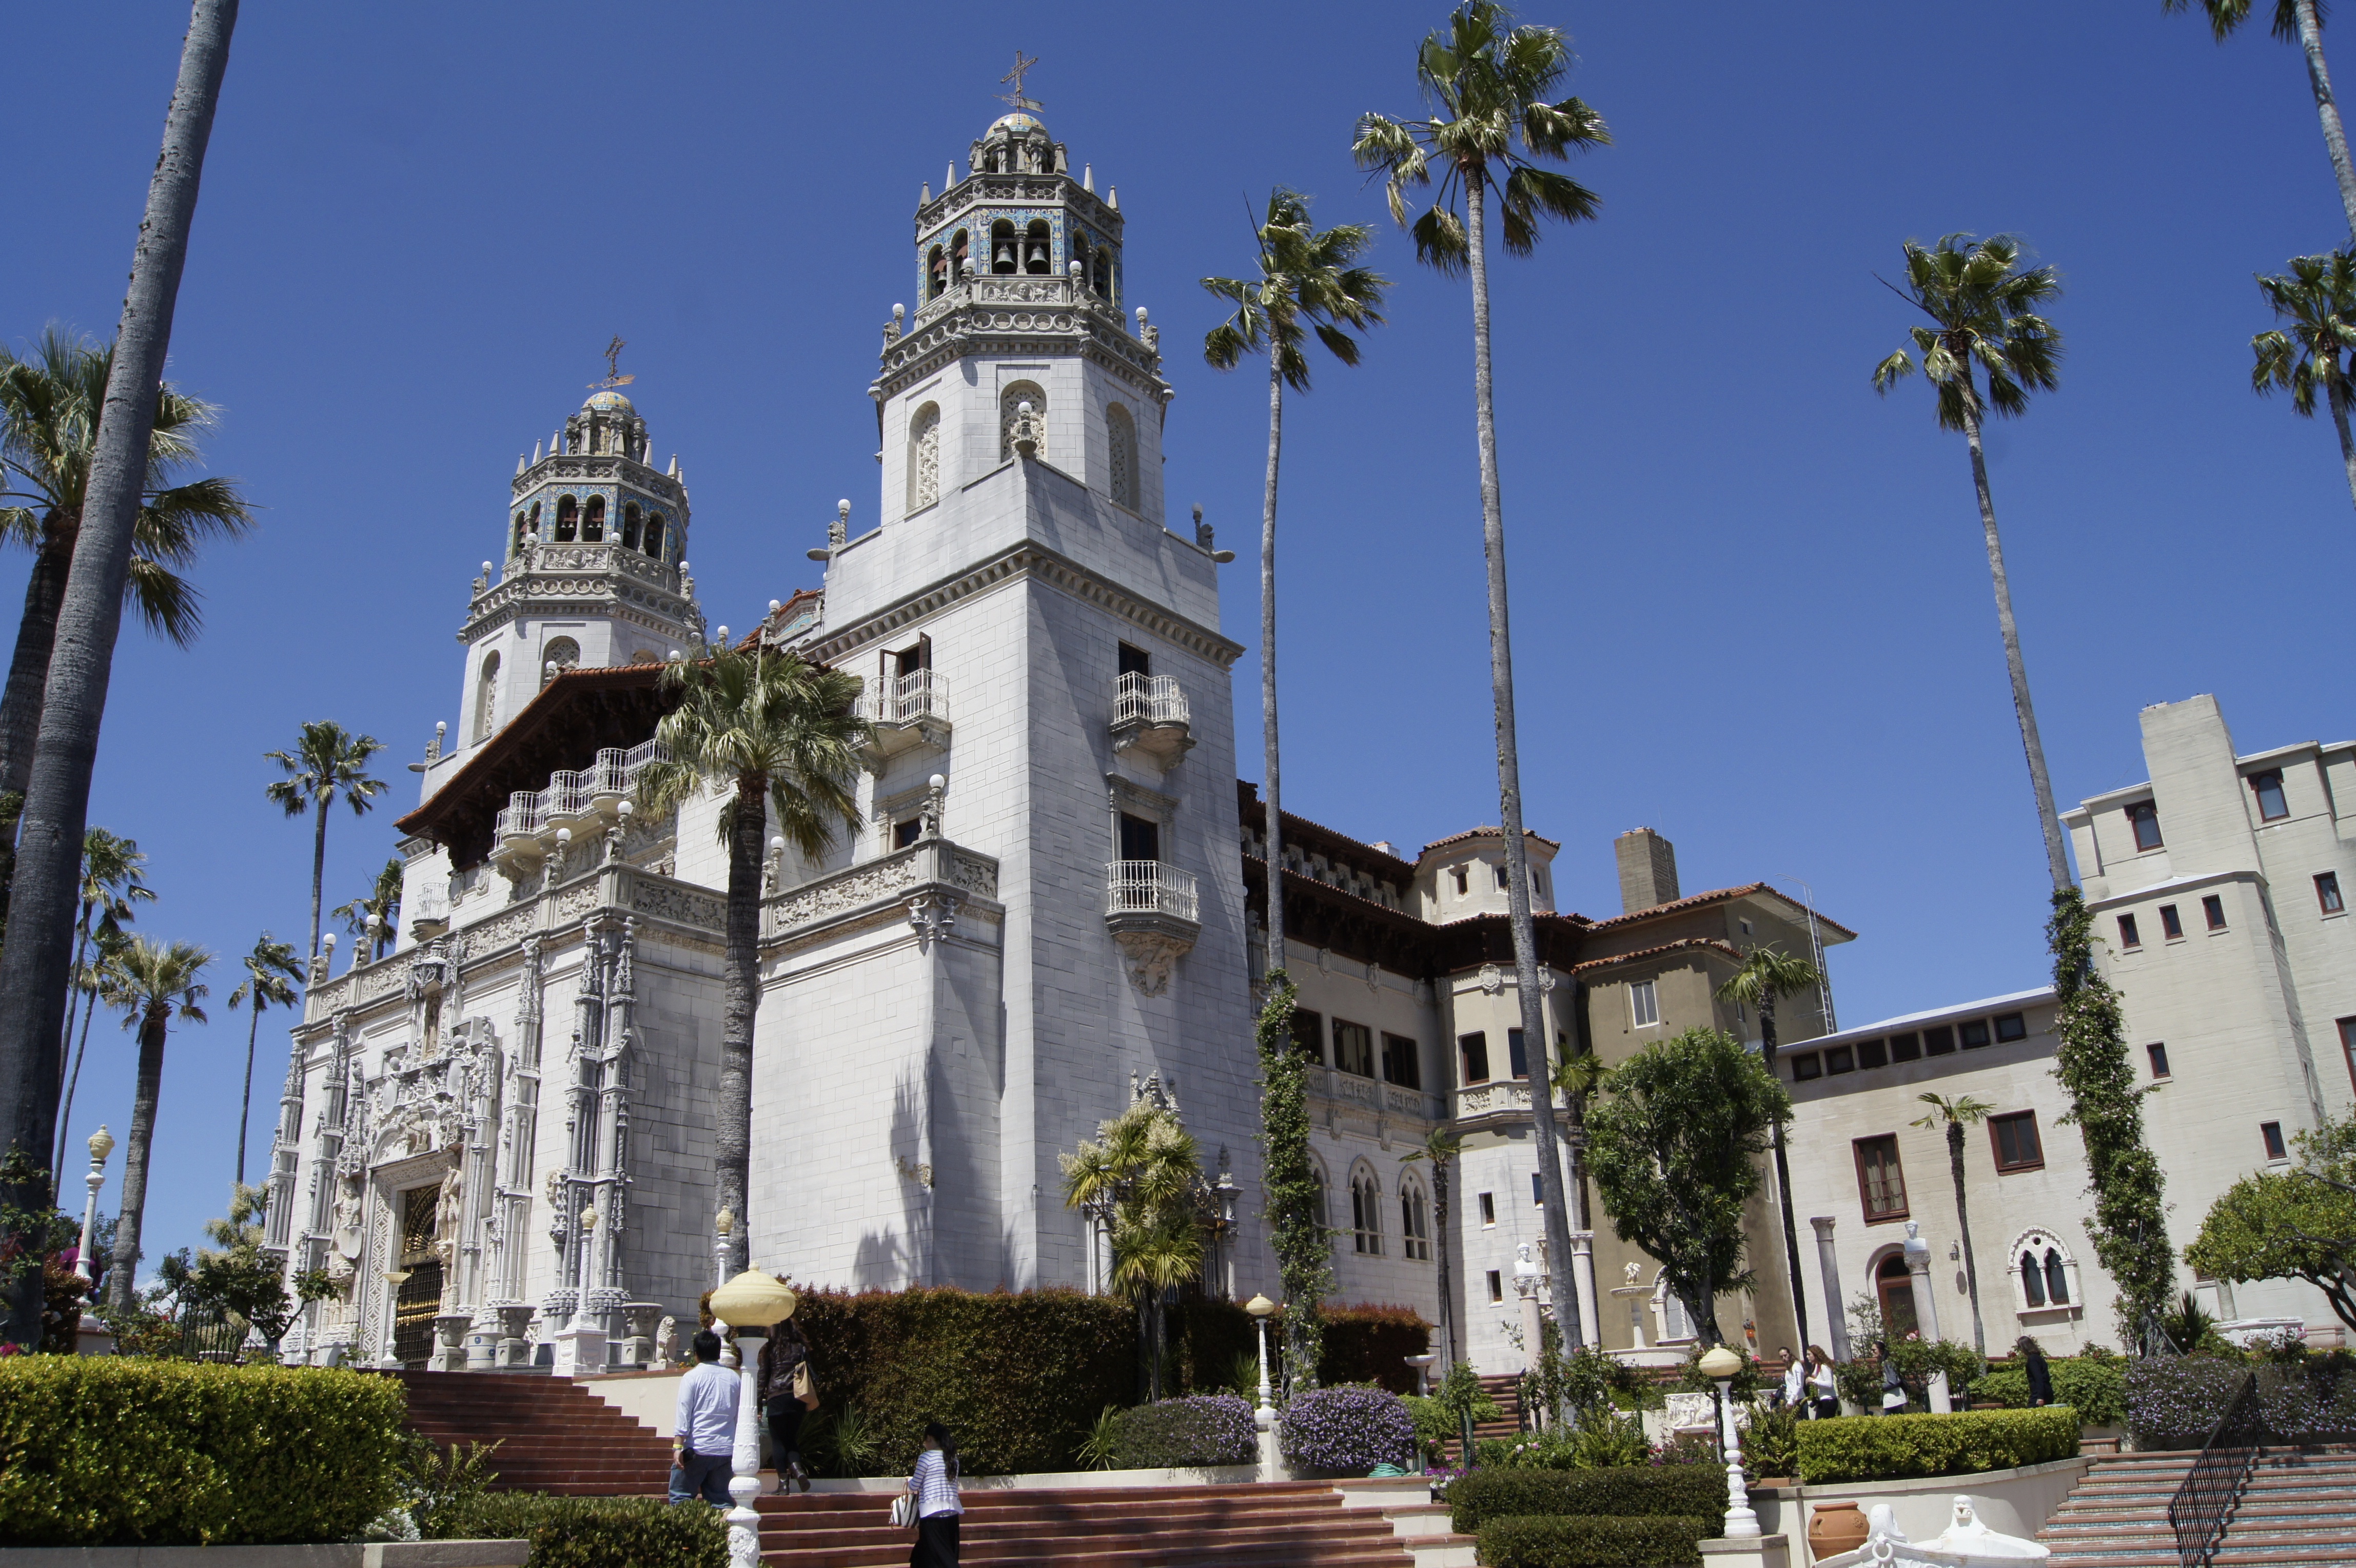 Hearst Castle from the outside